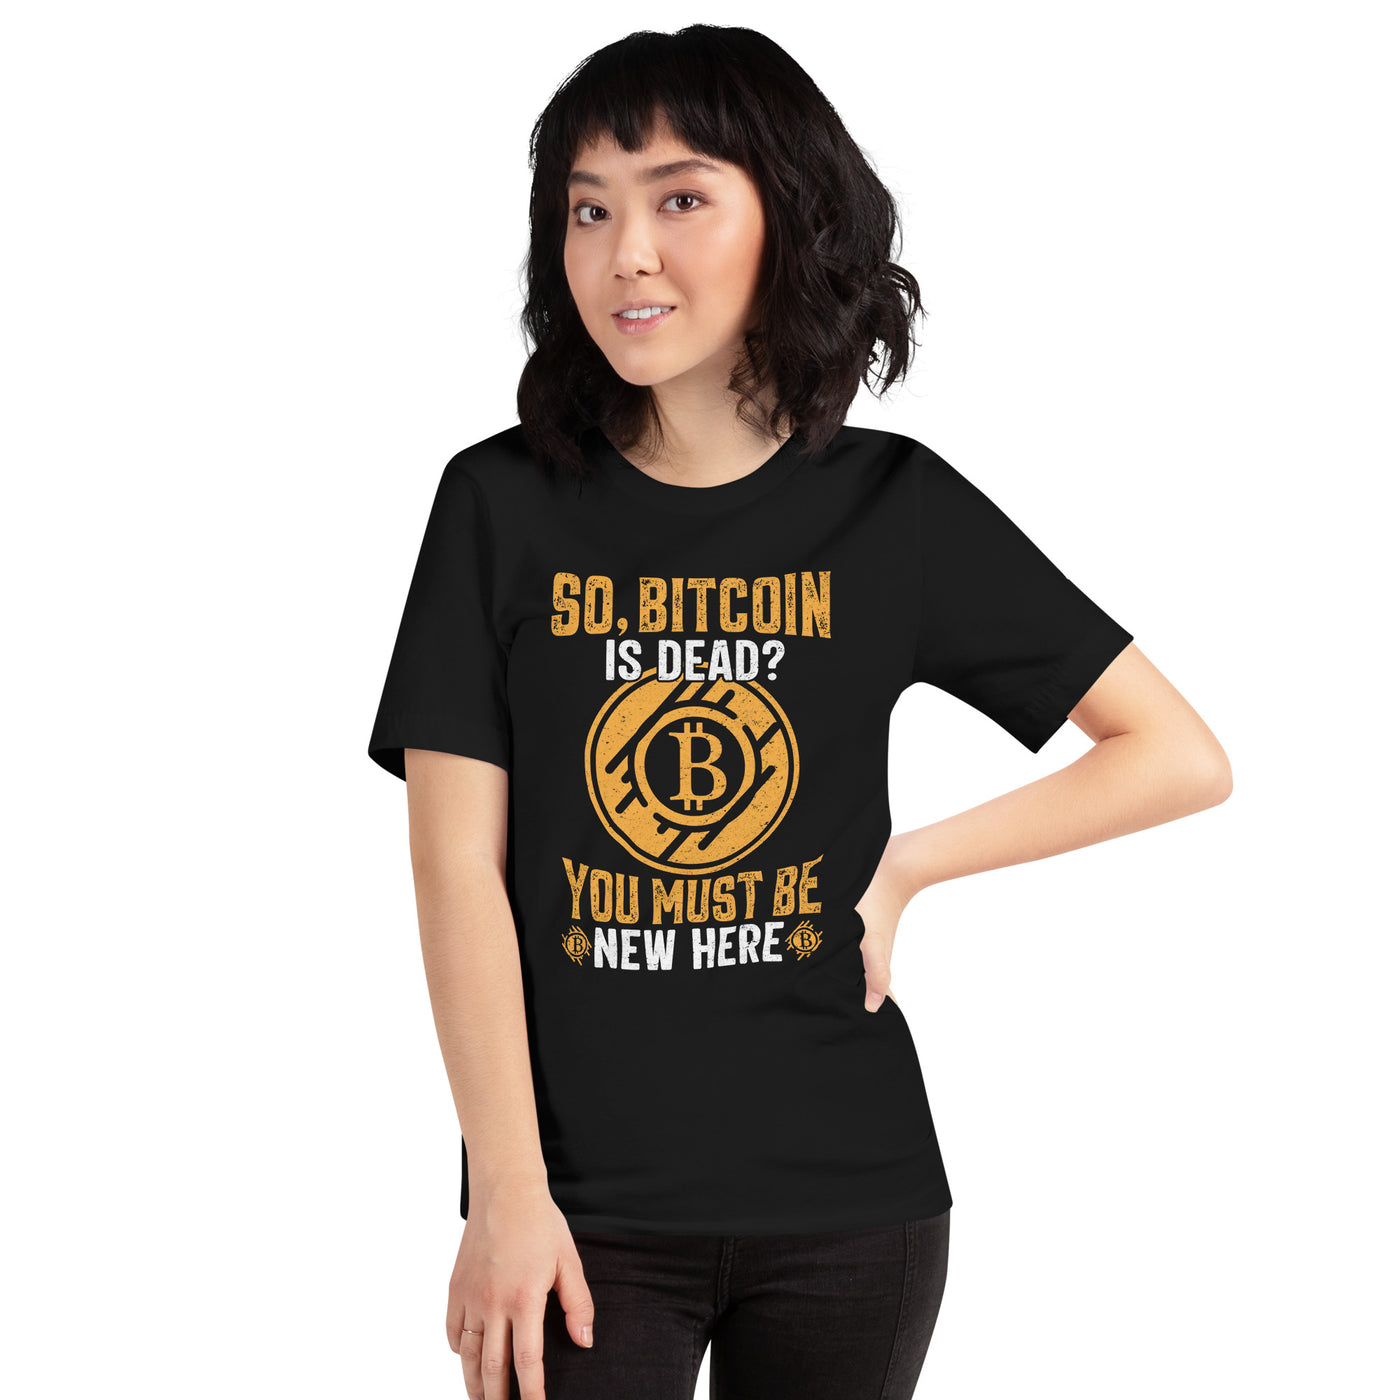 So, Bitcoin is Dead? You must be new here - Unisex t-shirt